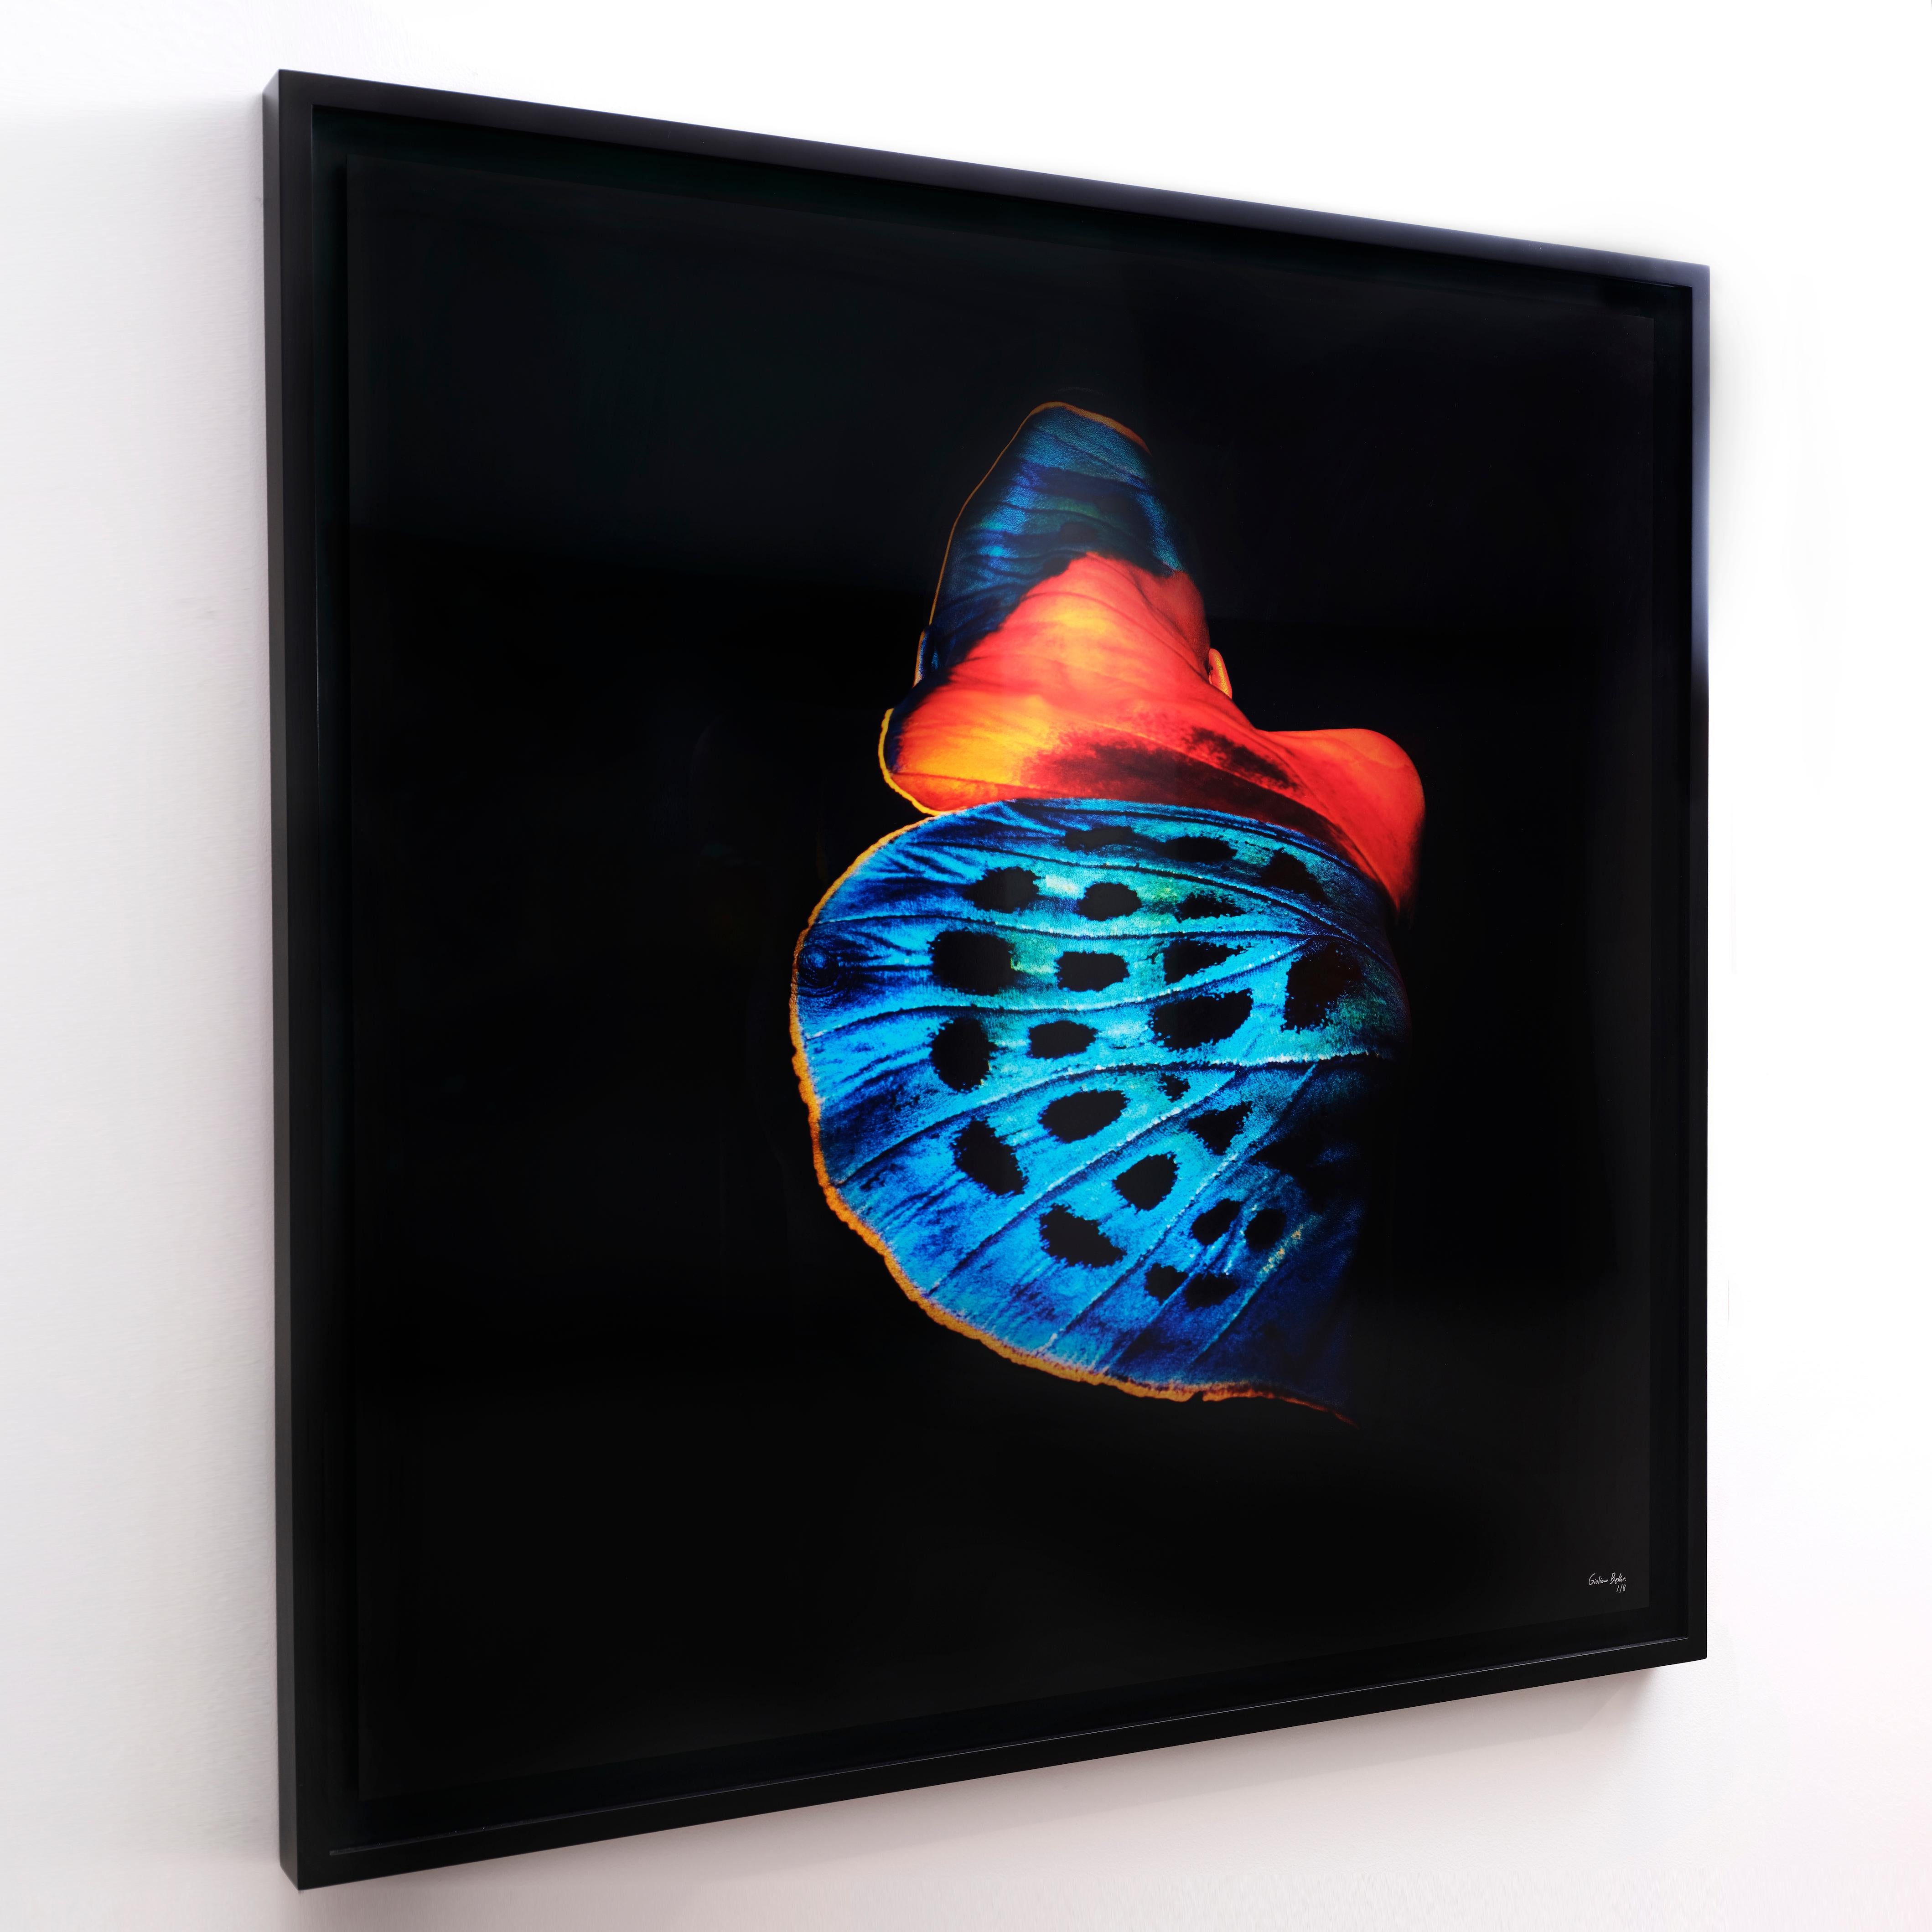 "Butterfly 13" (FRAMED) Photography 40" x 40" in Edition 1/8 by Giuliano Bekor